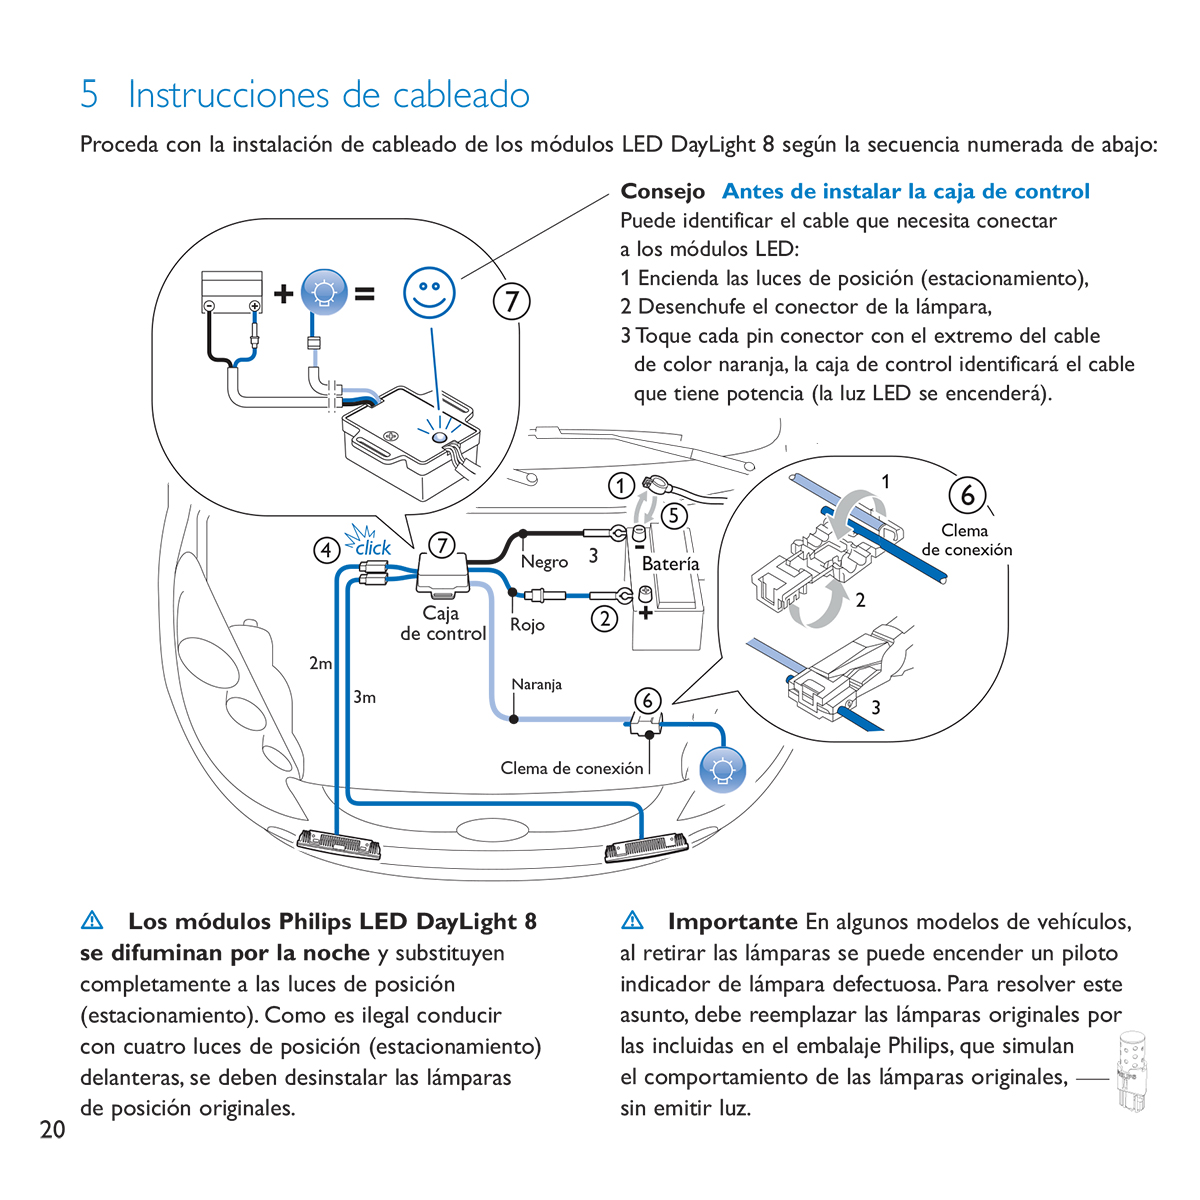 Philips LED DayLight 8 user guide - Inside page - Spanish